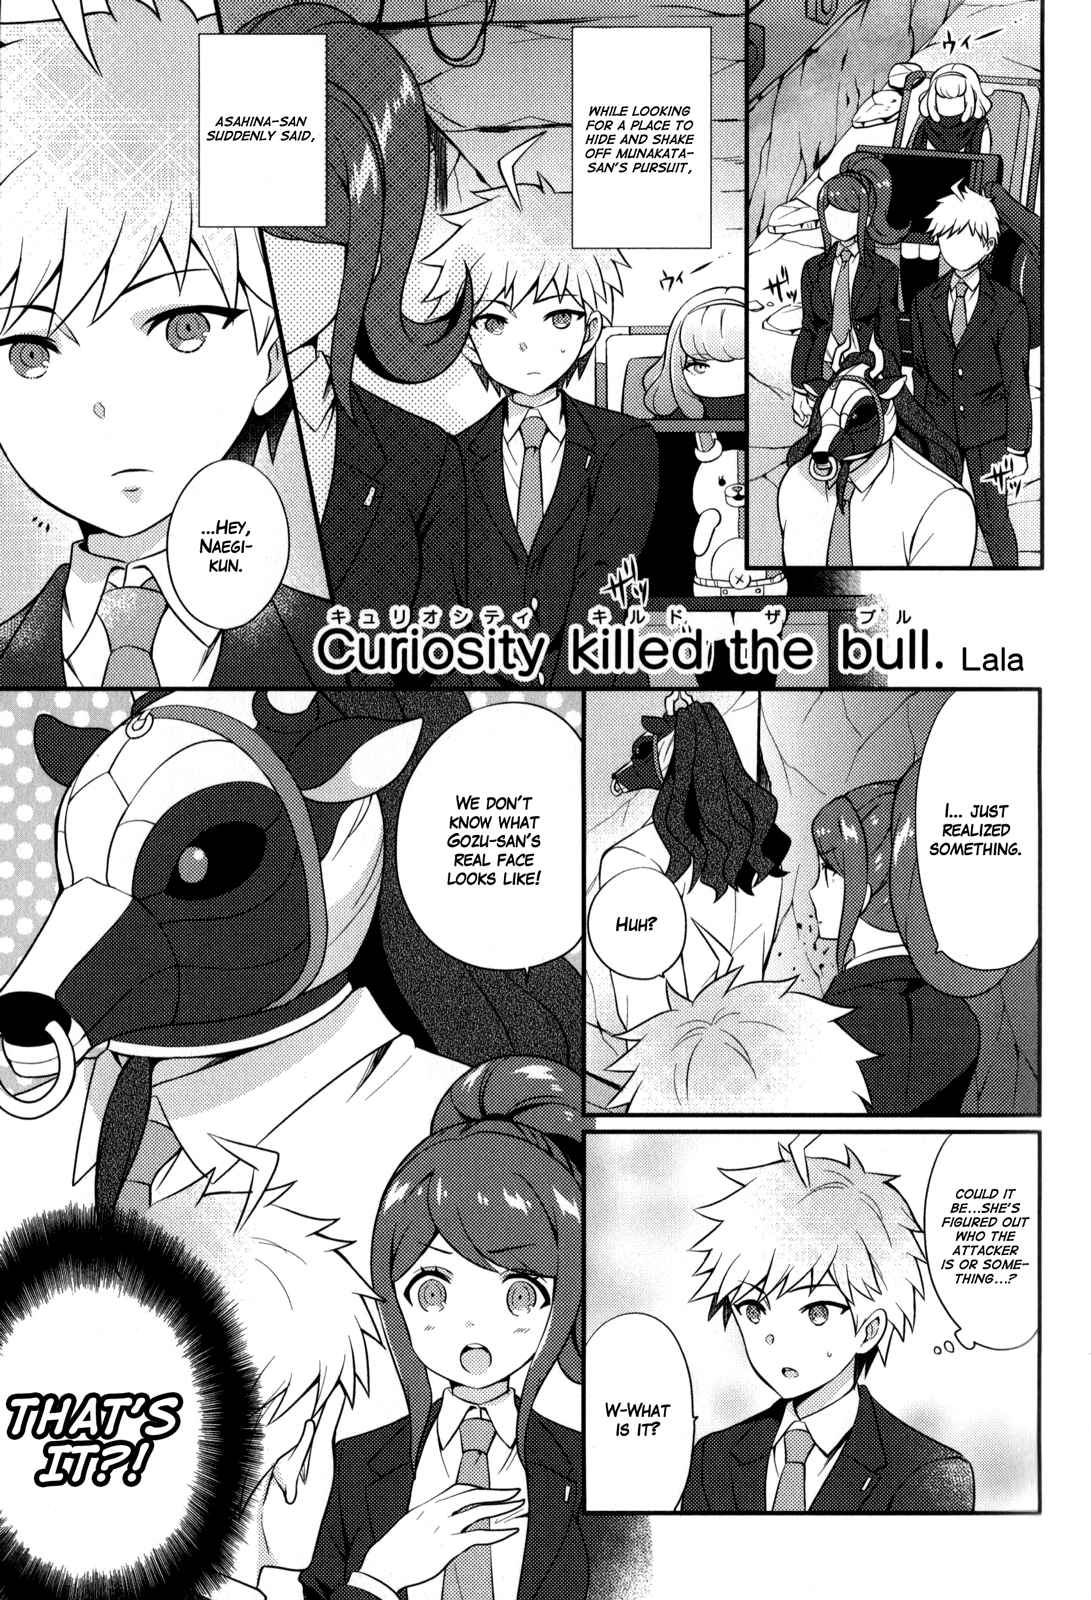 Danganronpa 3: The End of Hope's Peak Academy Future Arc & Despair Arc Comic Anthology (DNA Media) Vol. 1 Ch. 4 Curiosity Killed the Bull by Lala